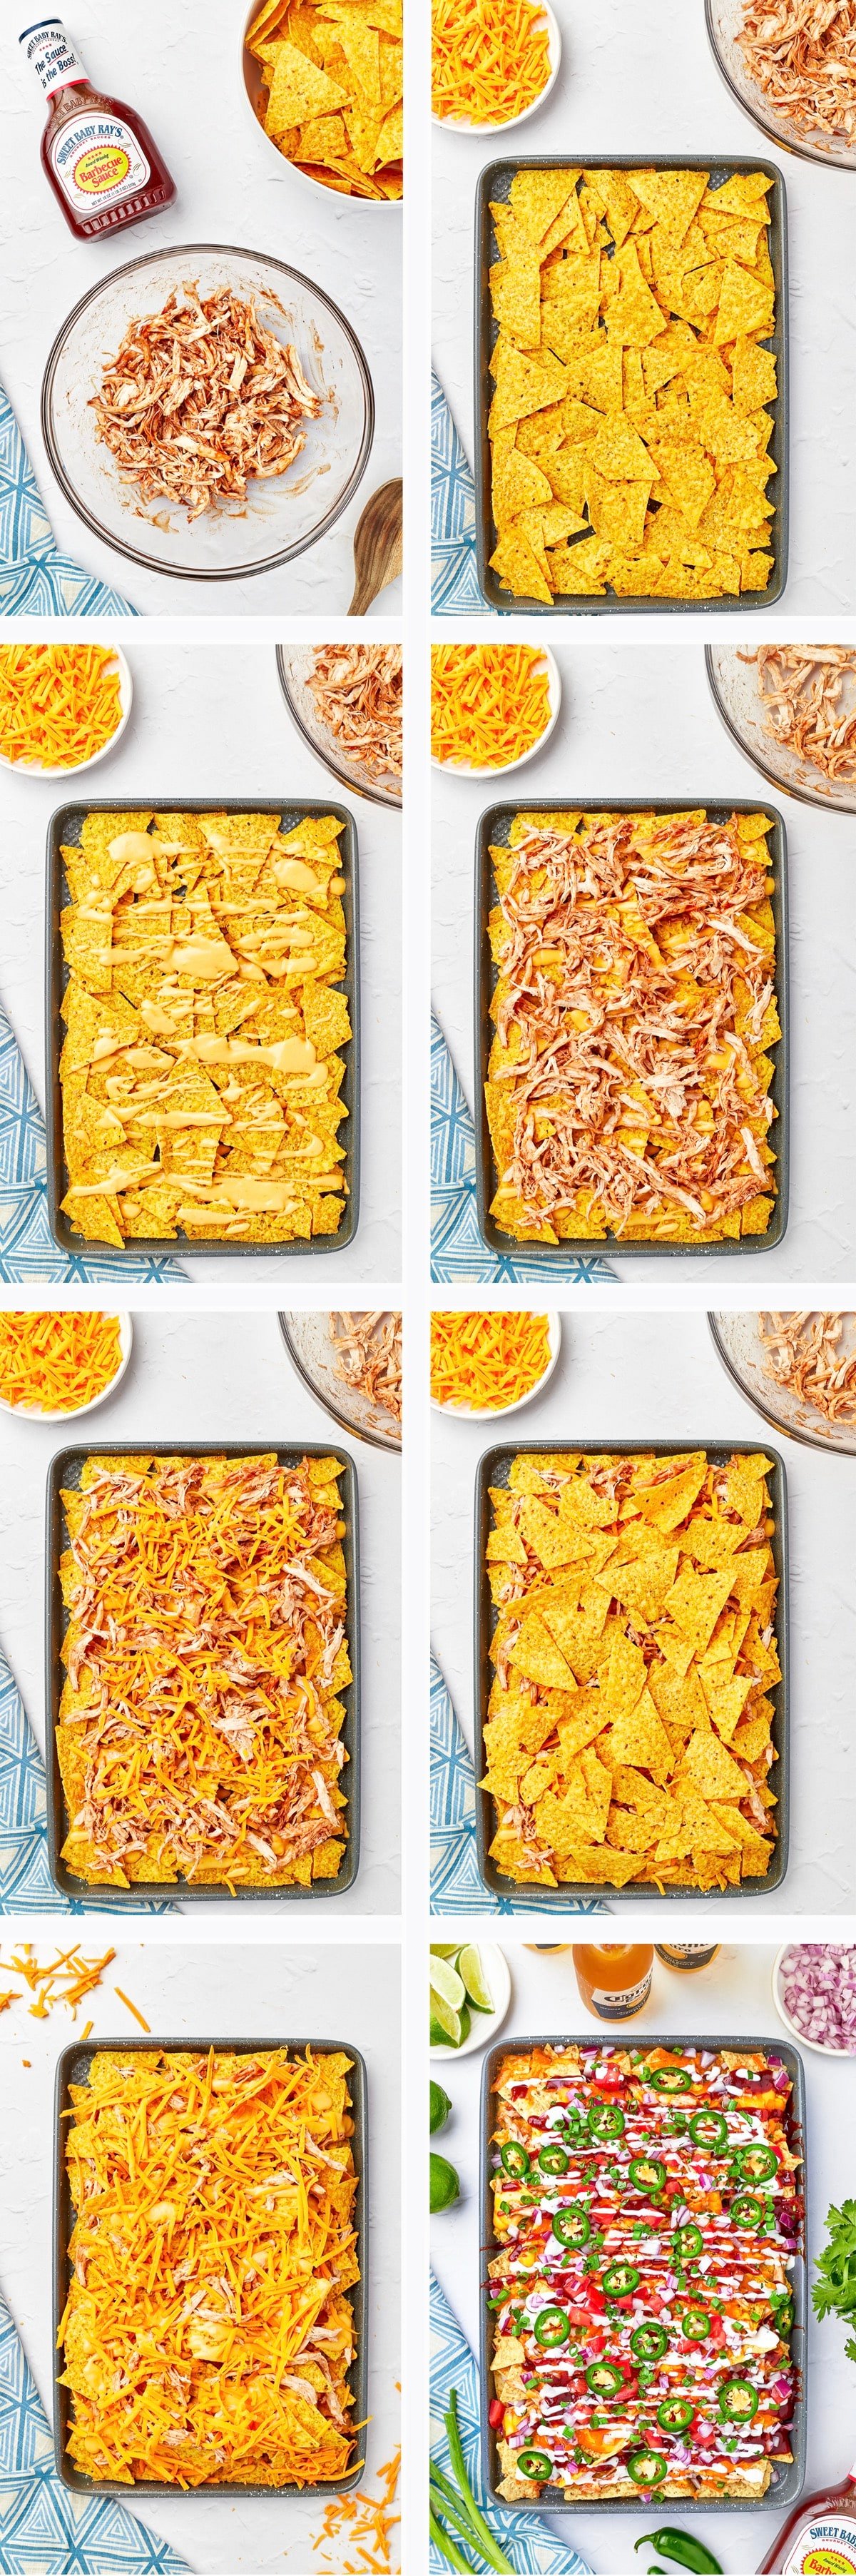 Overhead shots of a collage showing how to assemble BBQ Chicken Nachos on a white stucco table top